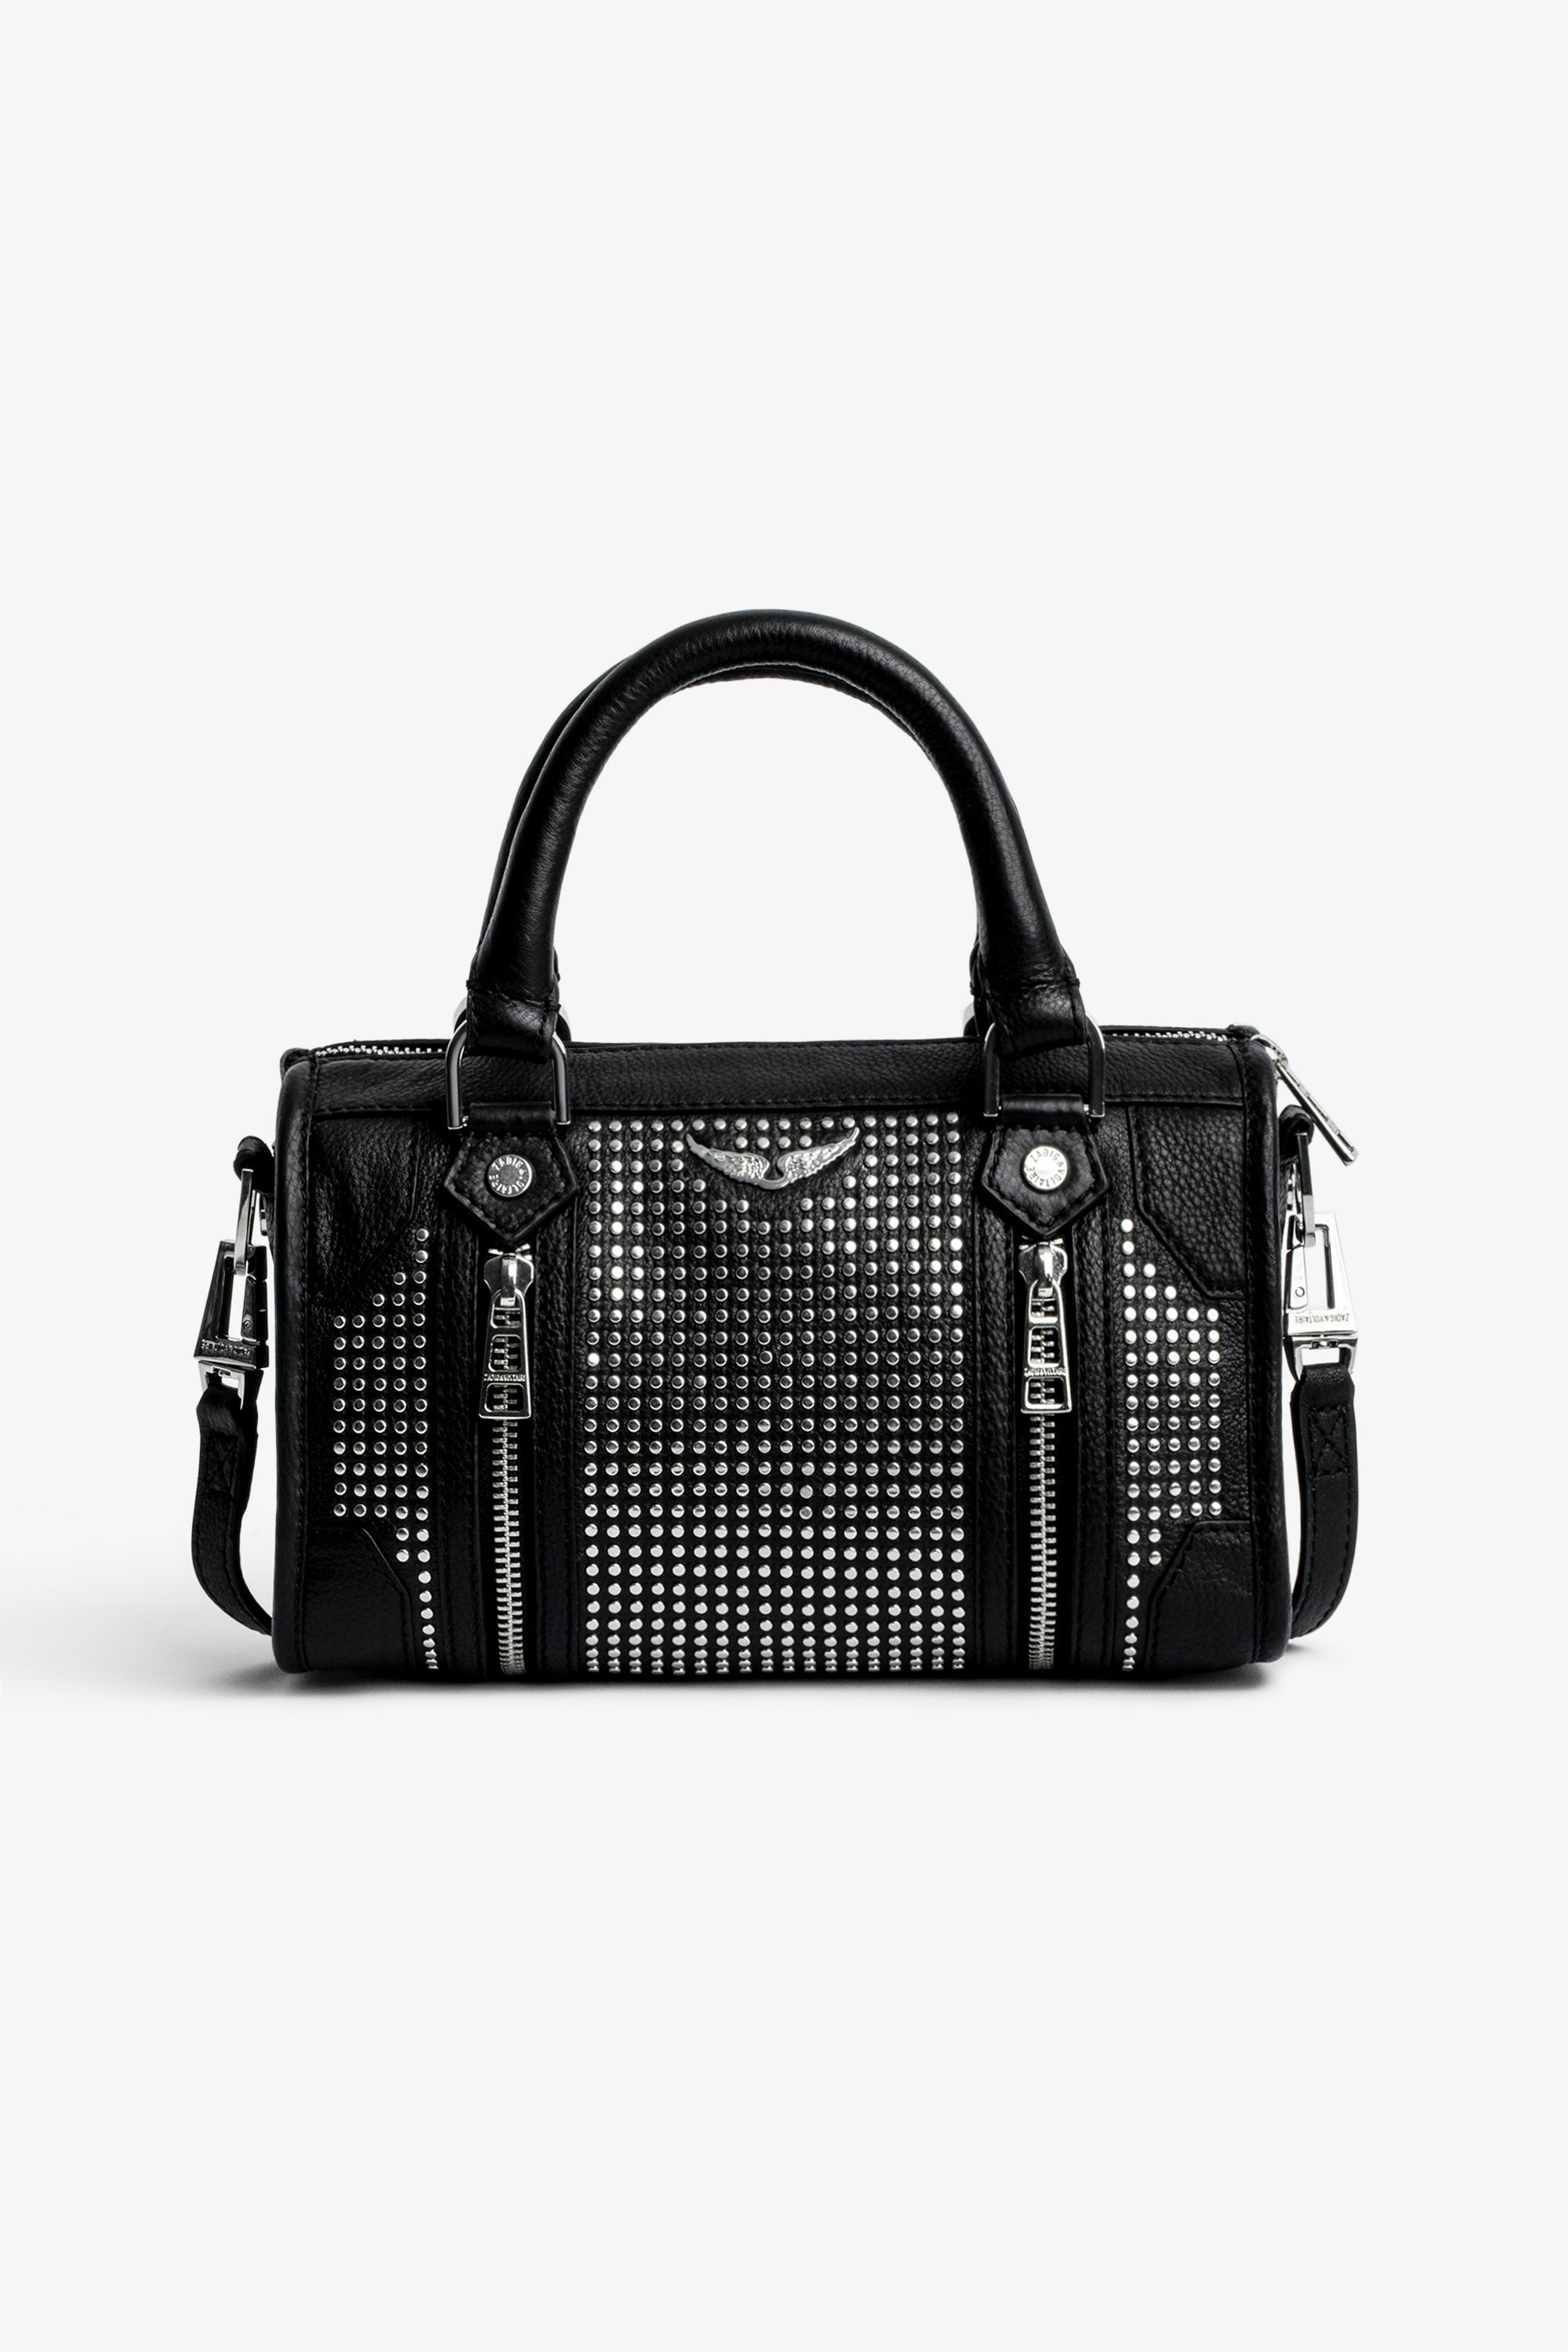 XS Sunny #2 バッグ Women’s small zipped bag in black leather with studs and a shoulder strap